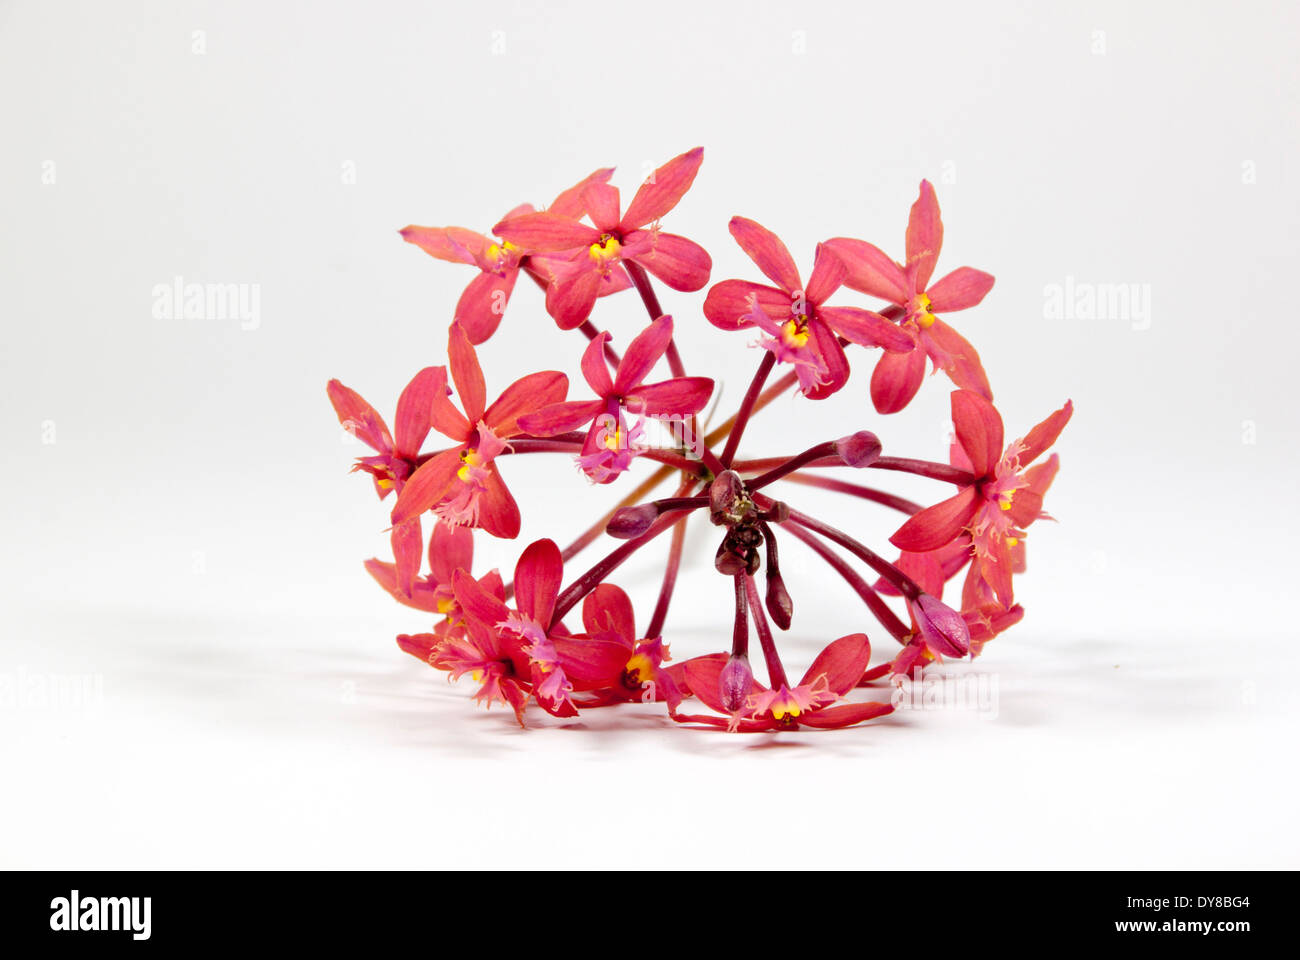 sprig of pink flowers from the eipdendrum orchid Stock Photo